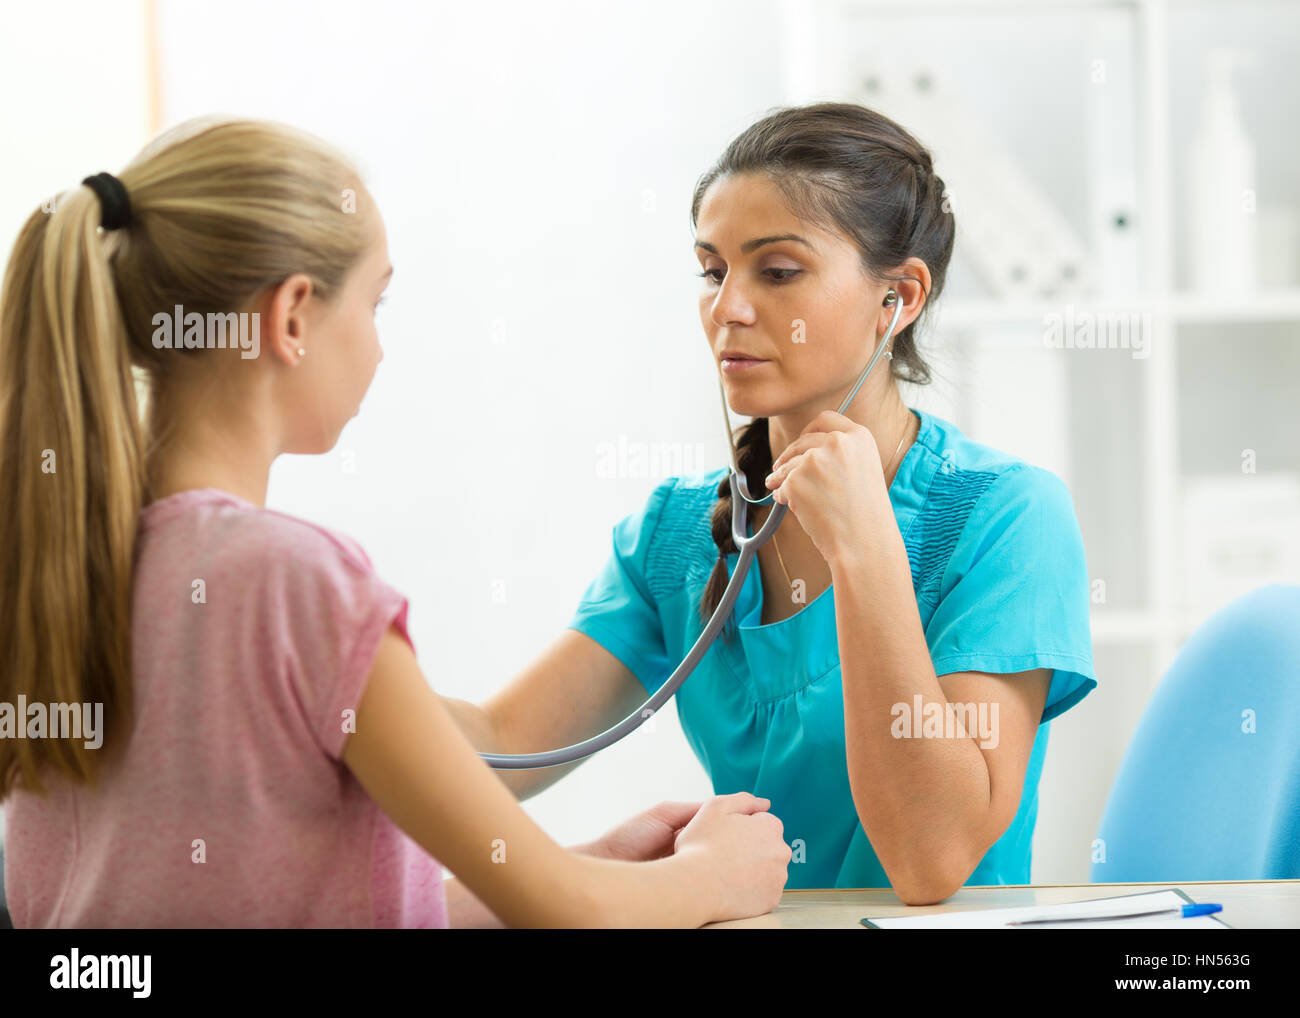 Child Teenager Patient Visiting Doctor's Office Stock Photo